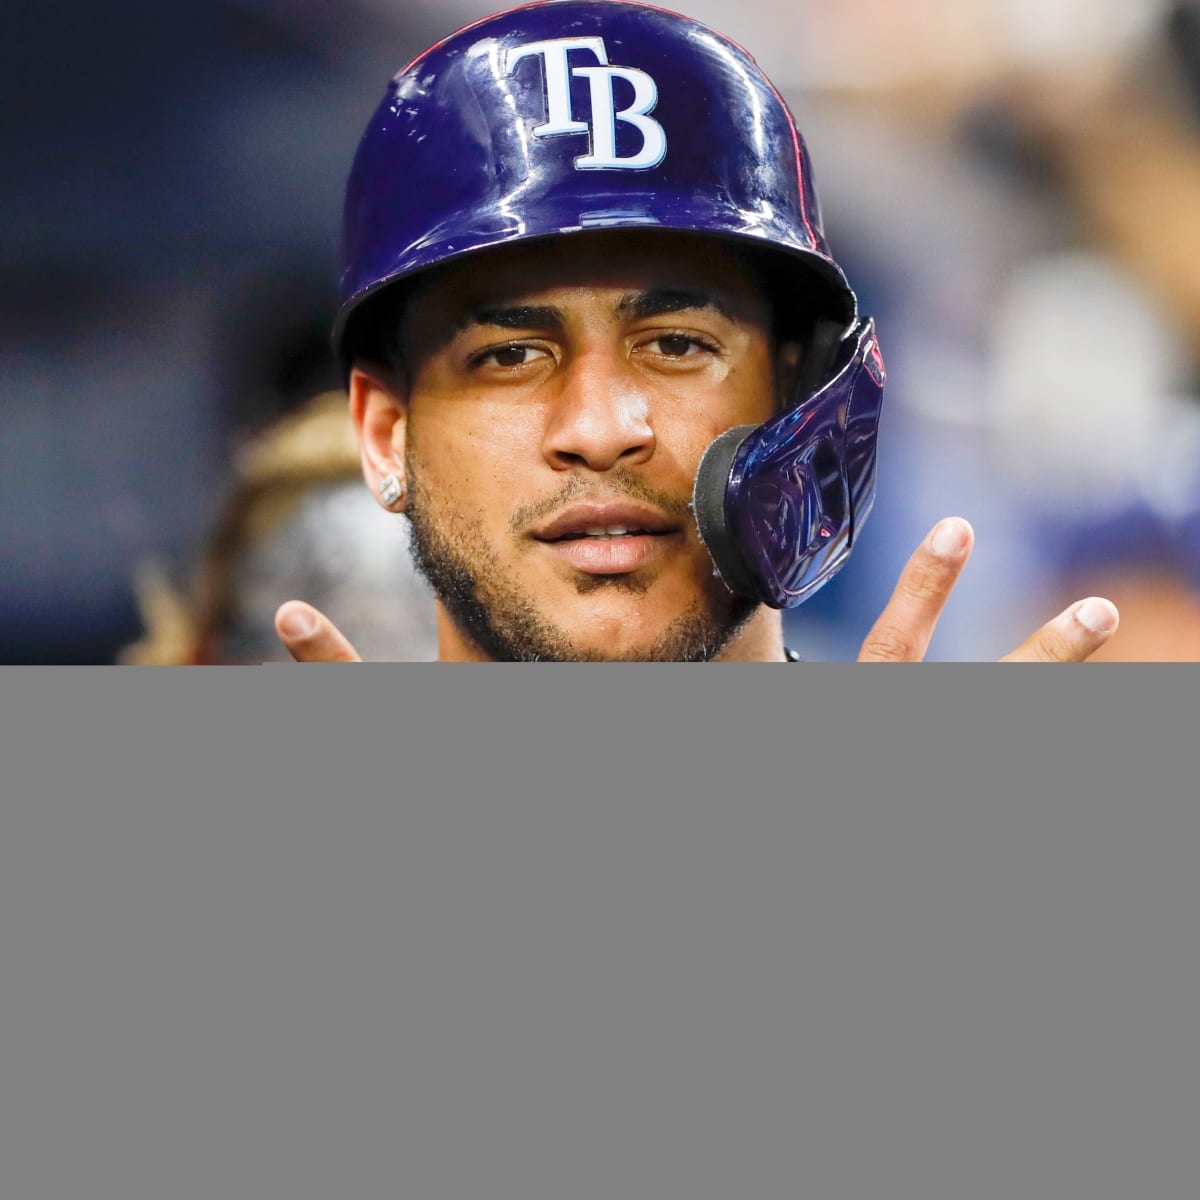 Jose Siri: The Rays, His Necklace, And Overall Play – Latino Sports